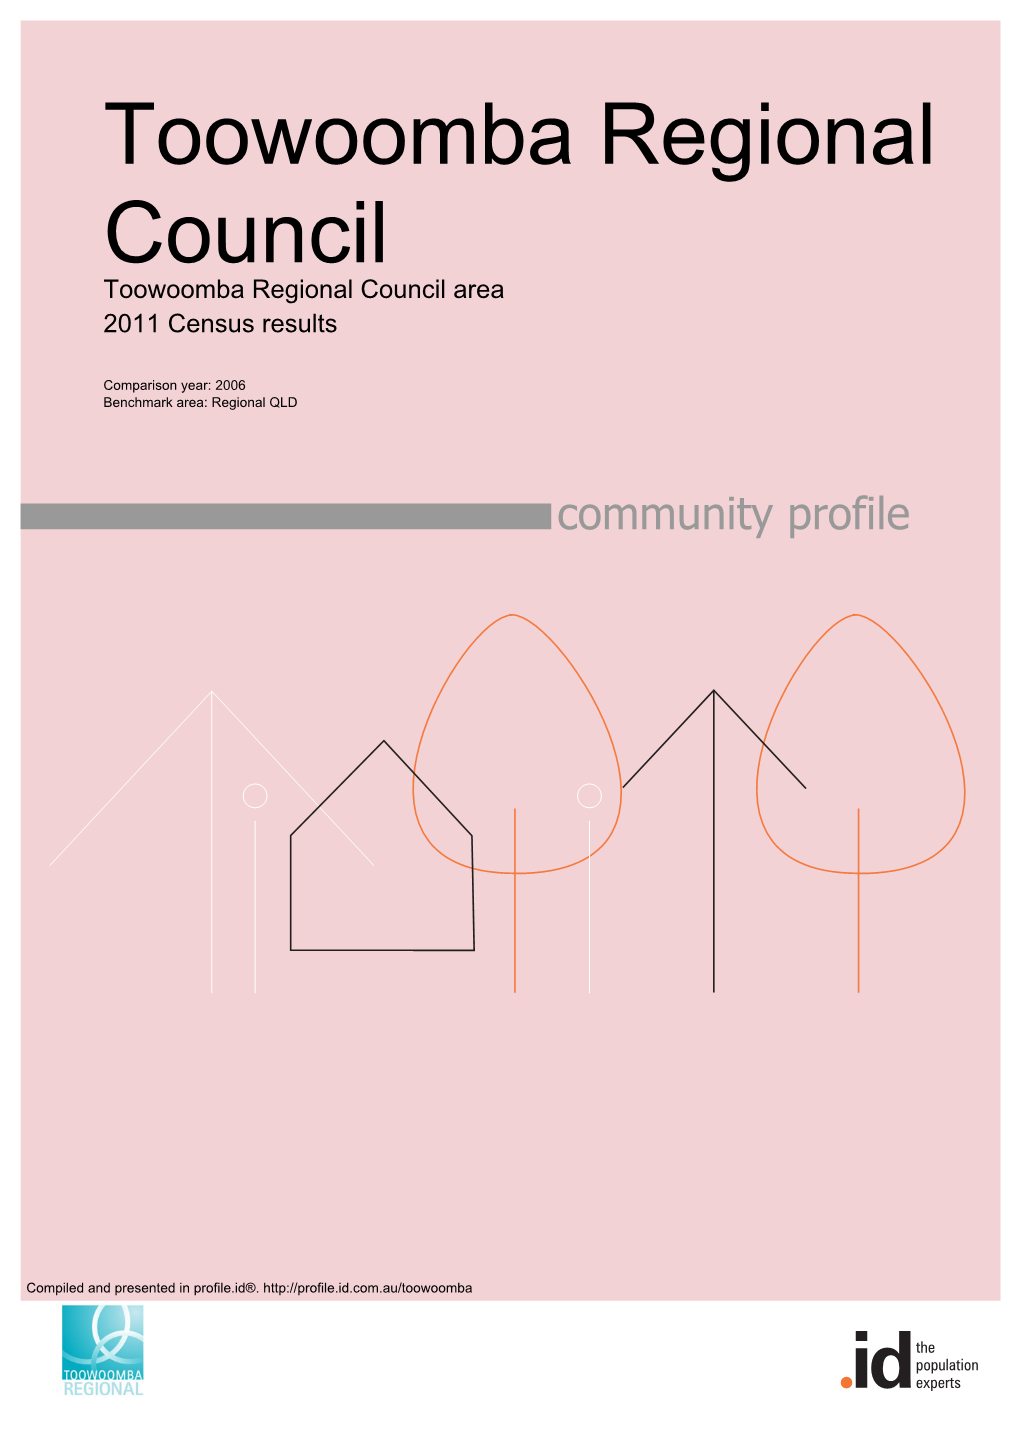 Toowoomba Regional Council Toowoomba Regional Council Area 2011 Census Results